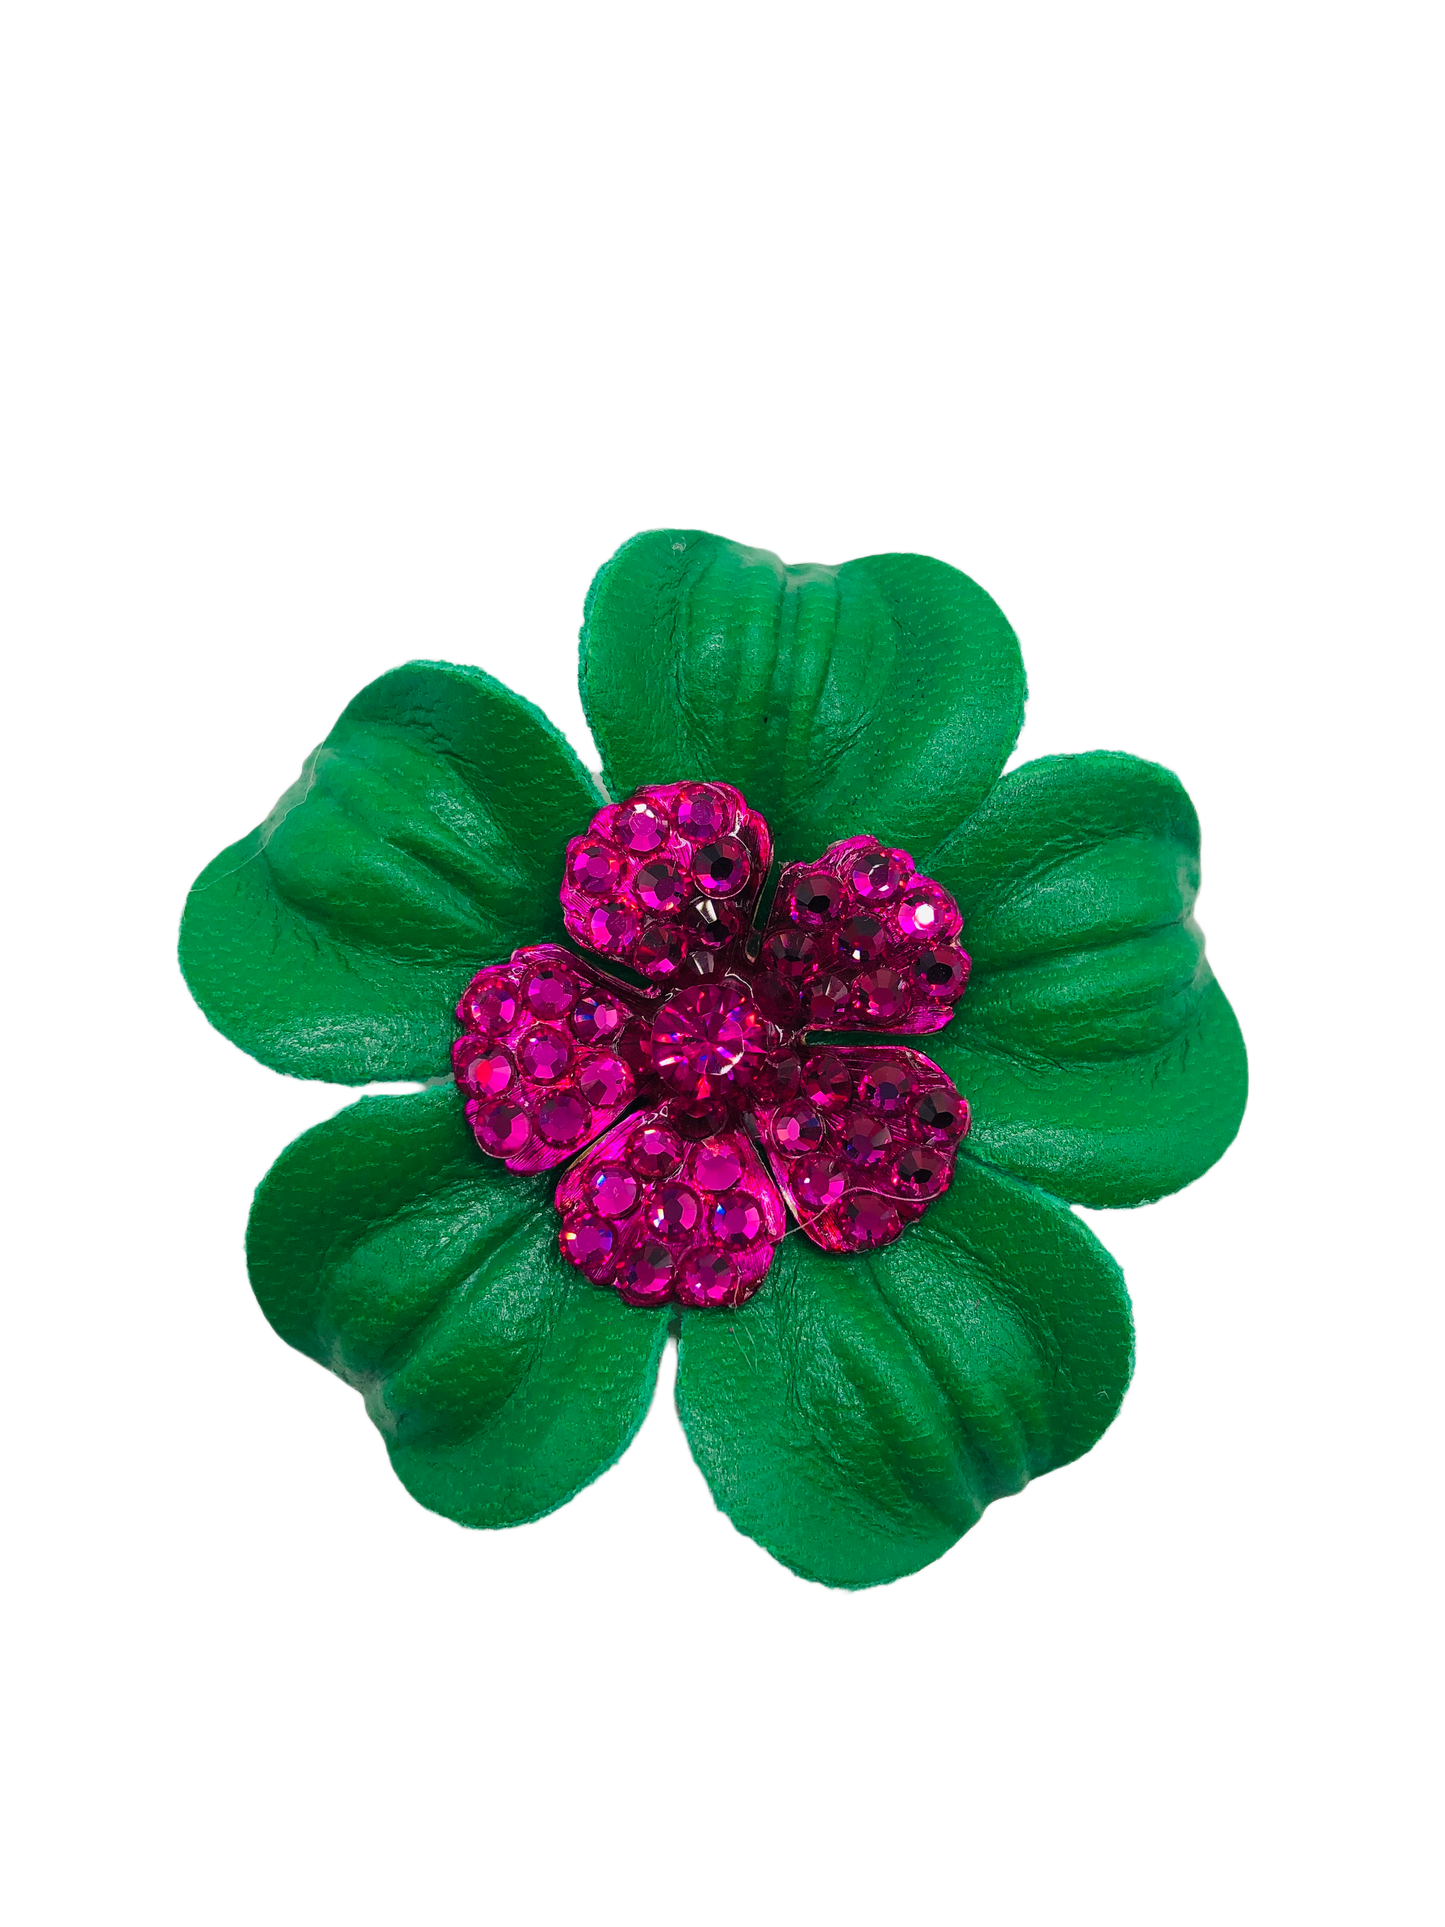 Karin's Garden 2.25" THE COCO  Petite Green Pink Leather & Crystal Flower Pin & Clip. Made in the USA